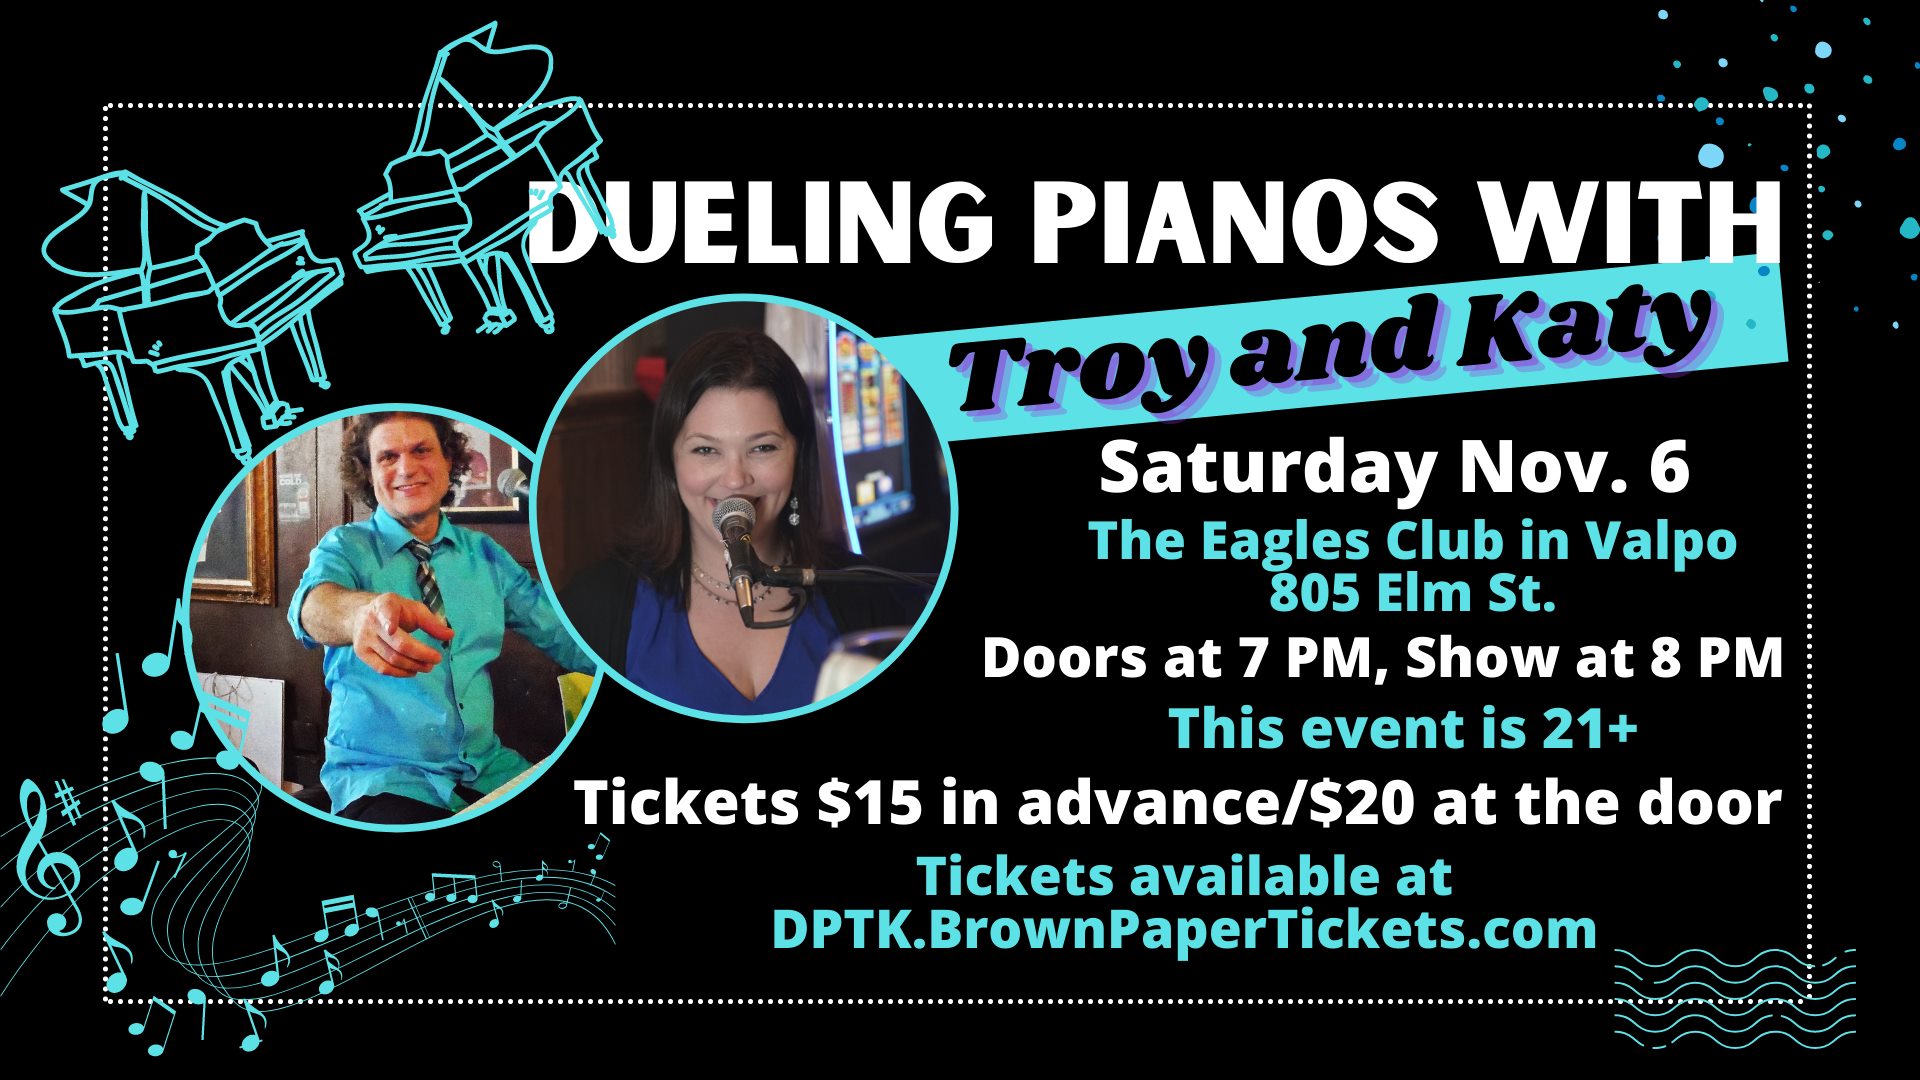 Dueling Pianos with Troy and Katy! - 11/6